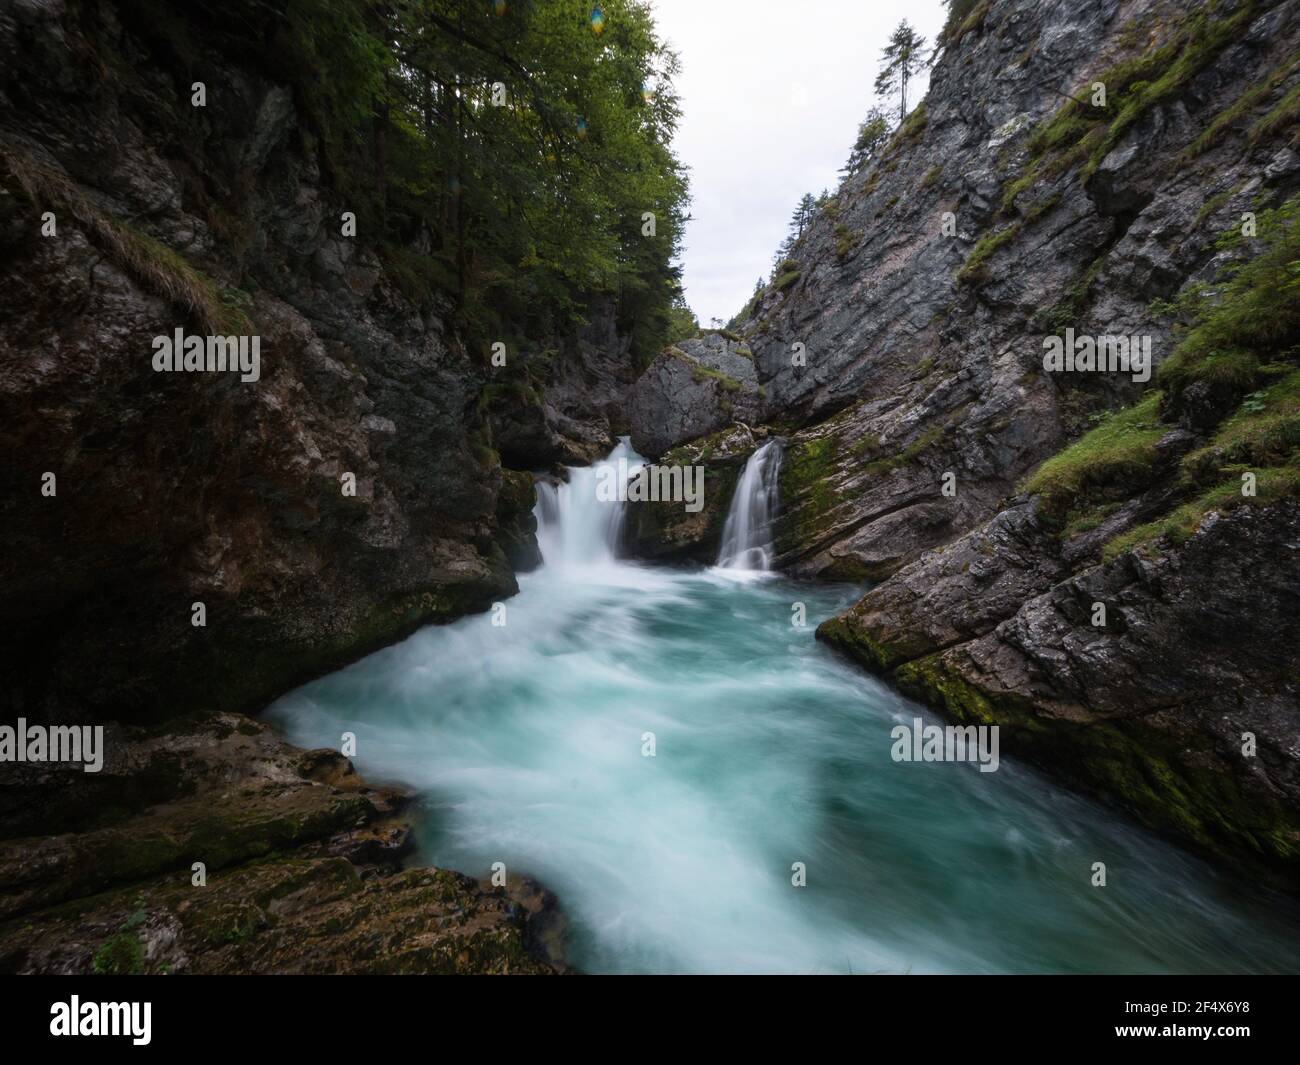 Long exposure panorama of Stromboding waterfall rapids cascade in azure blue turquoise alpine mountain river Steyr Tiefenthal Hinterstoder Upper Austr Stock Photo